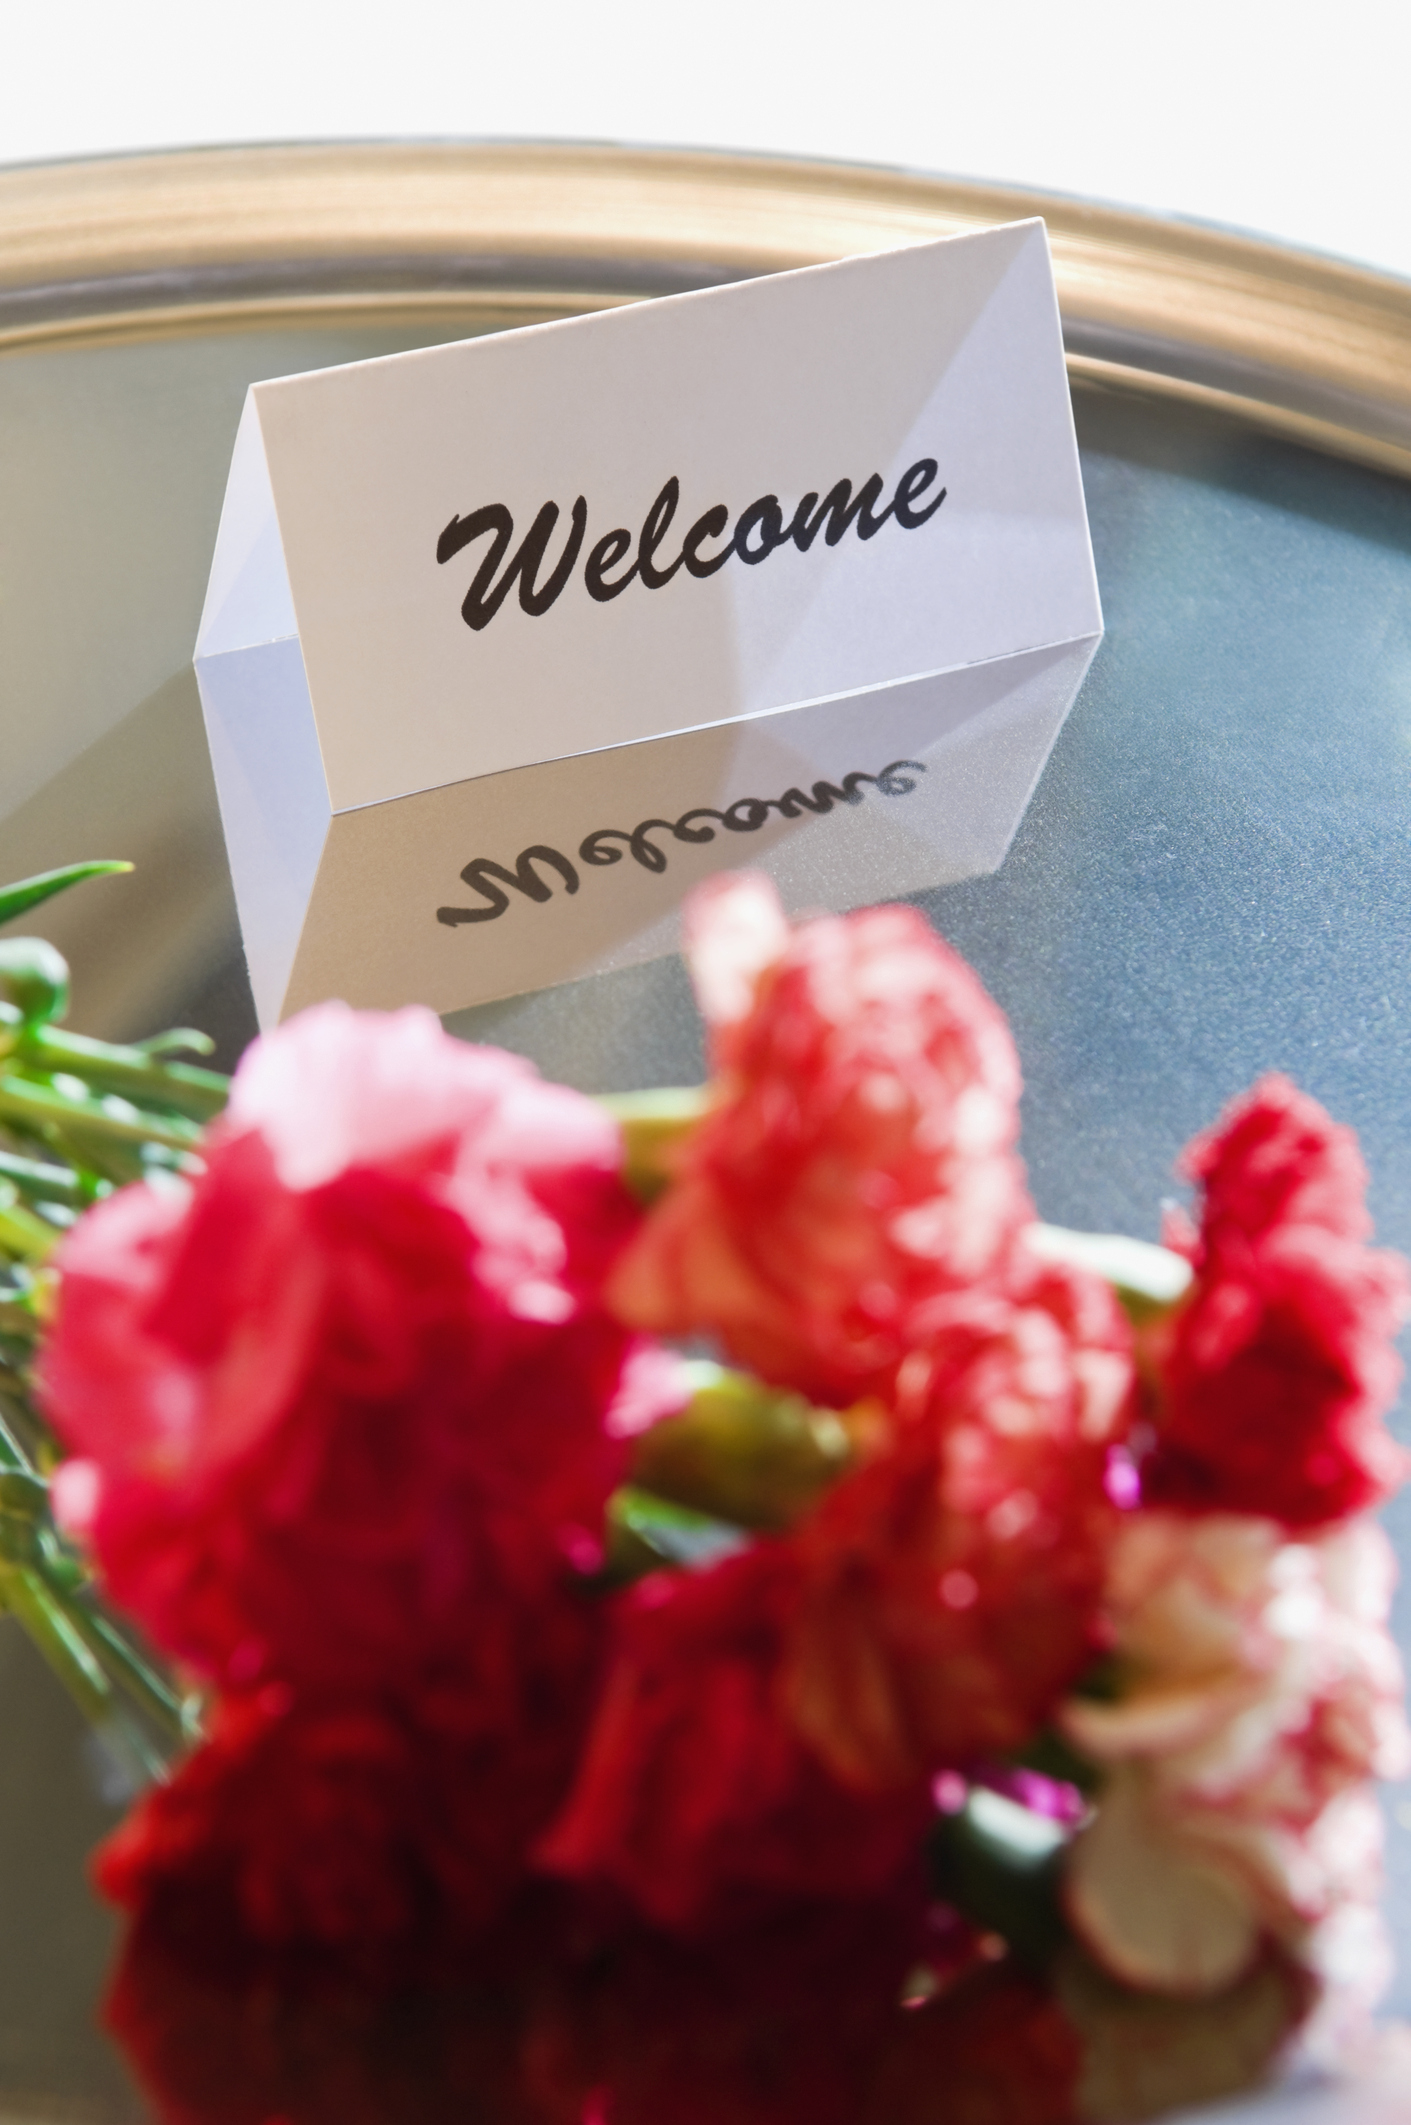 Welcome card on a table